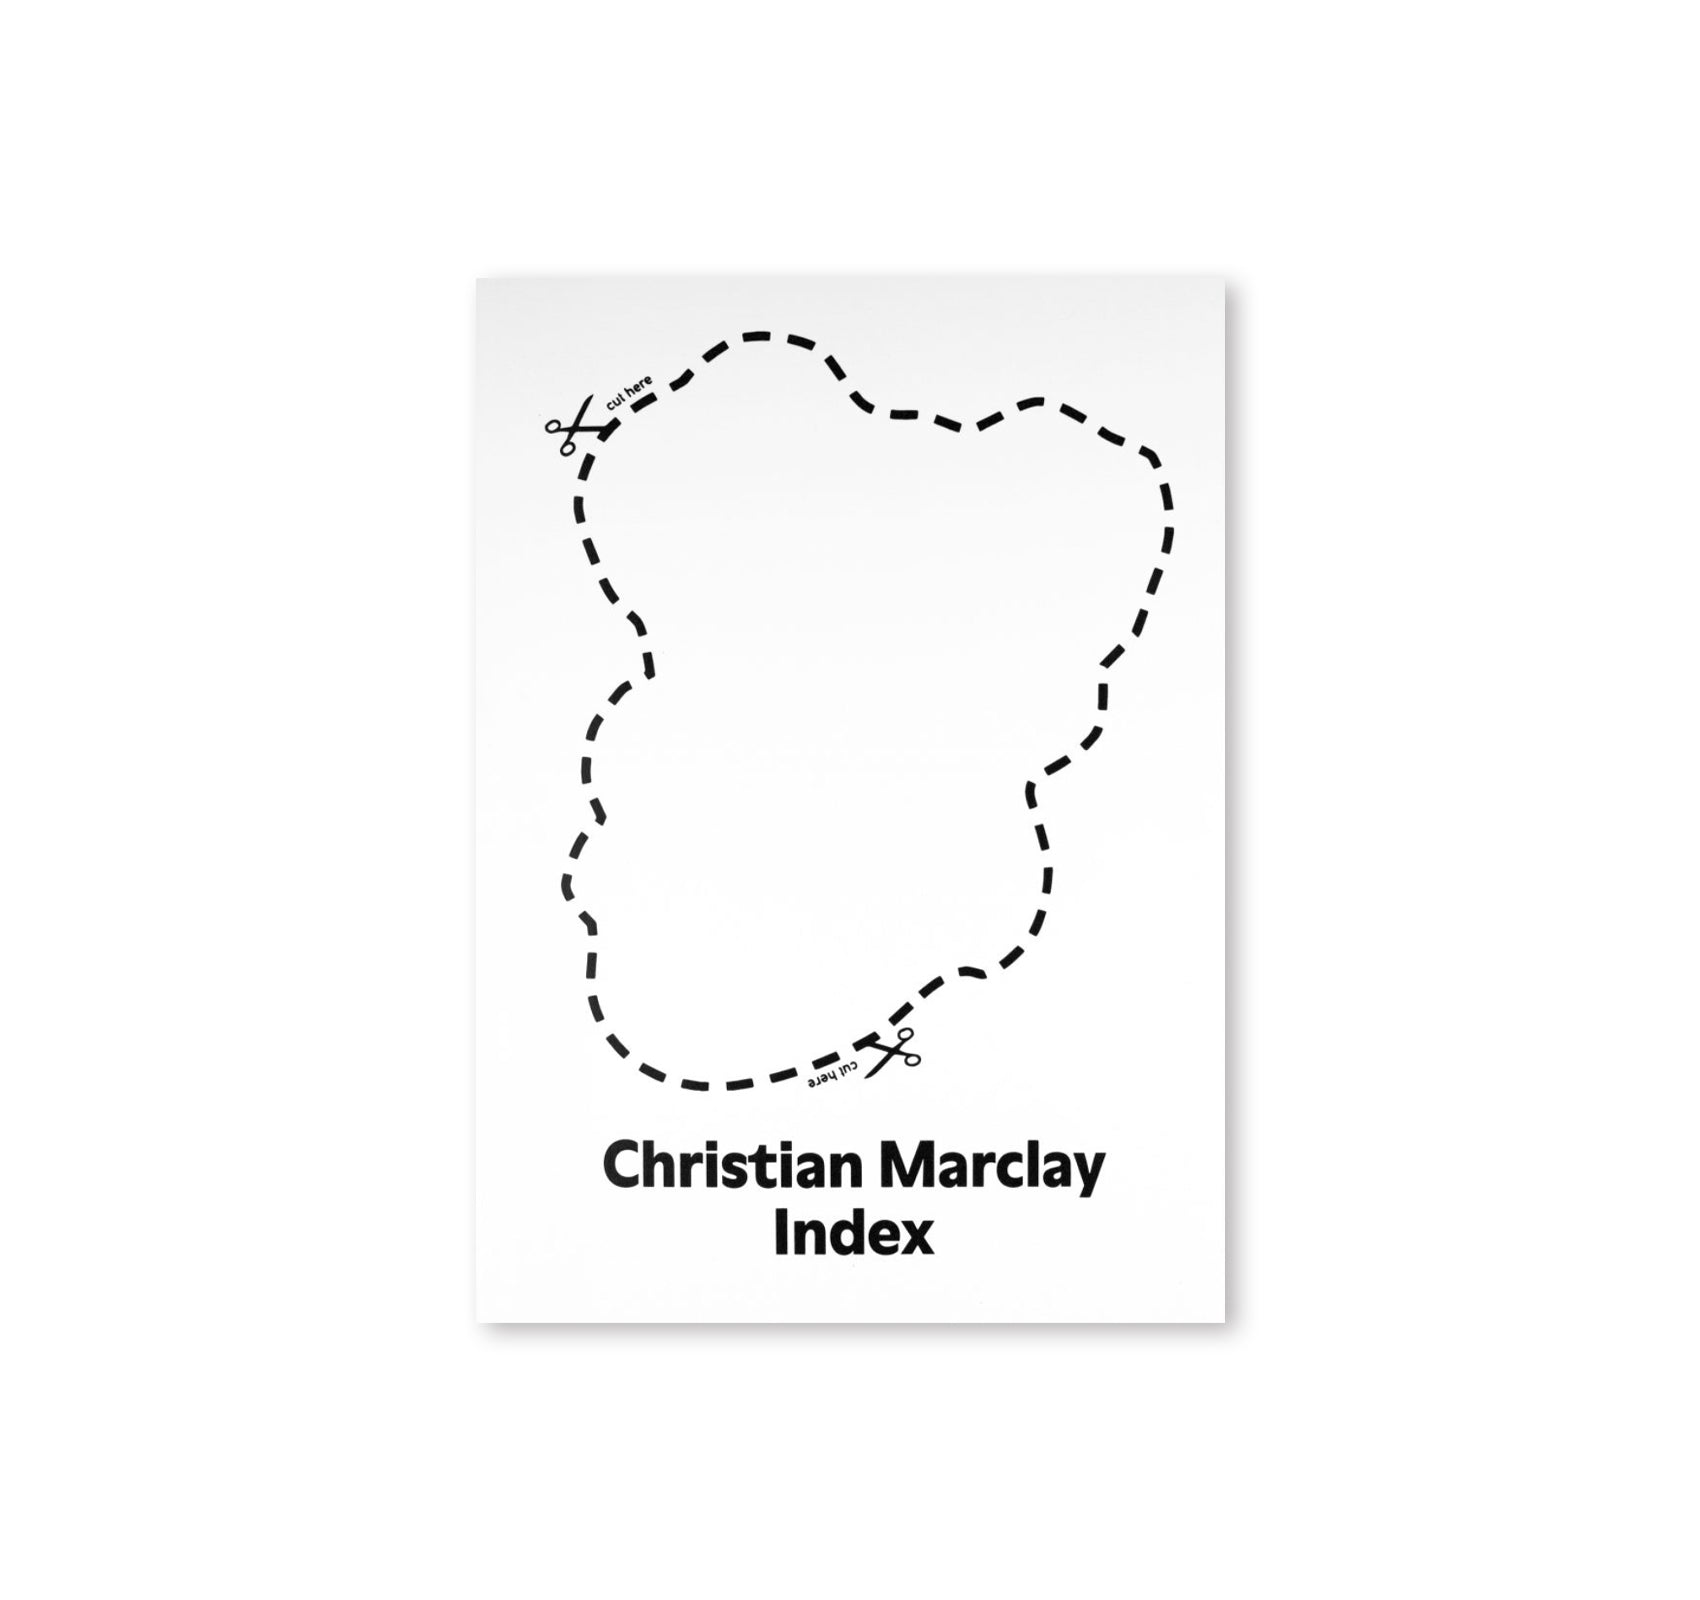 INDEX by Christian Marclay